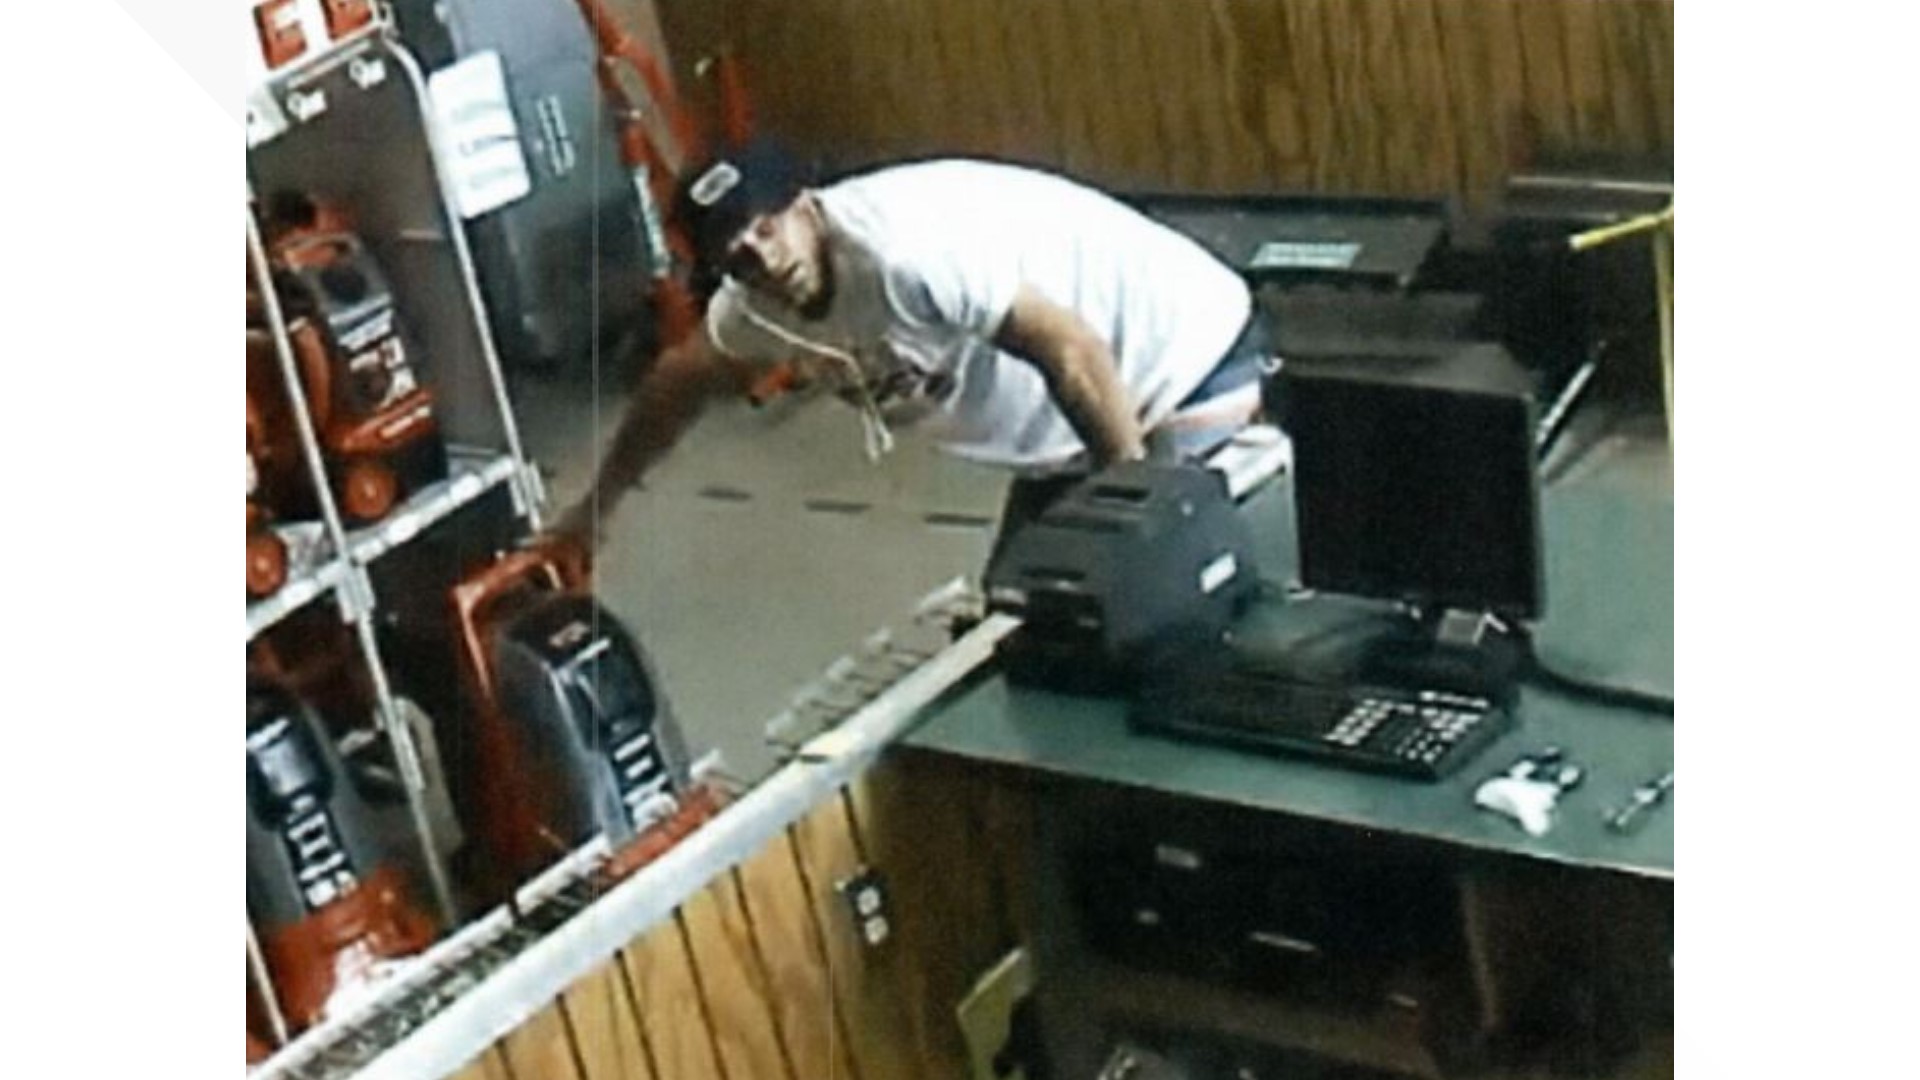 Authorities in Mecosta County are trying to track down a thief who made out with thousands of dollars in goods from a Menards store. Investigators say video footage shows the suspect entering the store on two different occasions and leaving through the garden center area with more than $1,000 in merchandise.